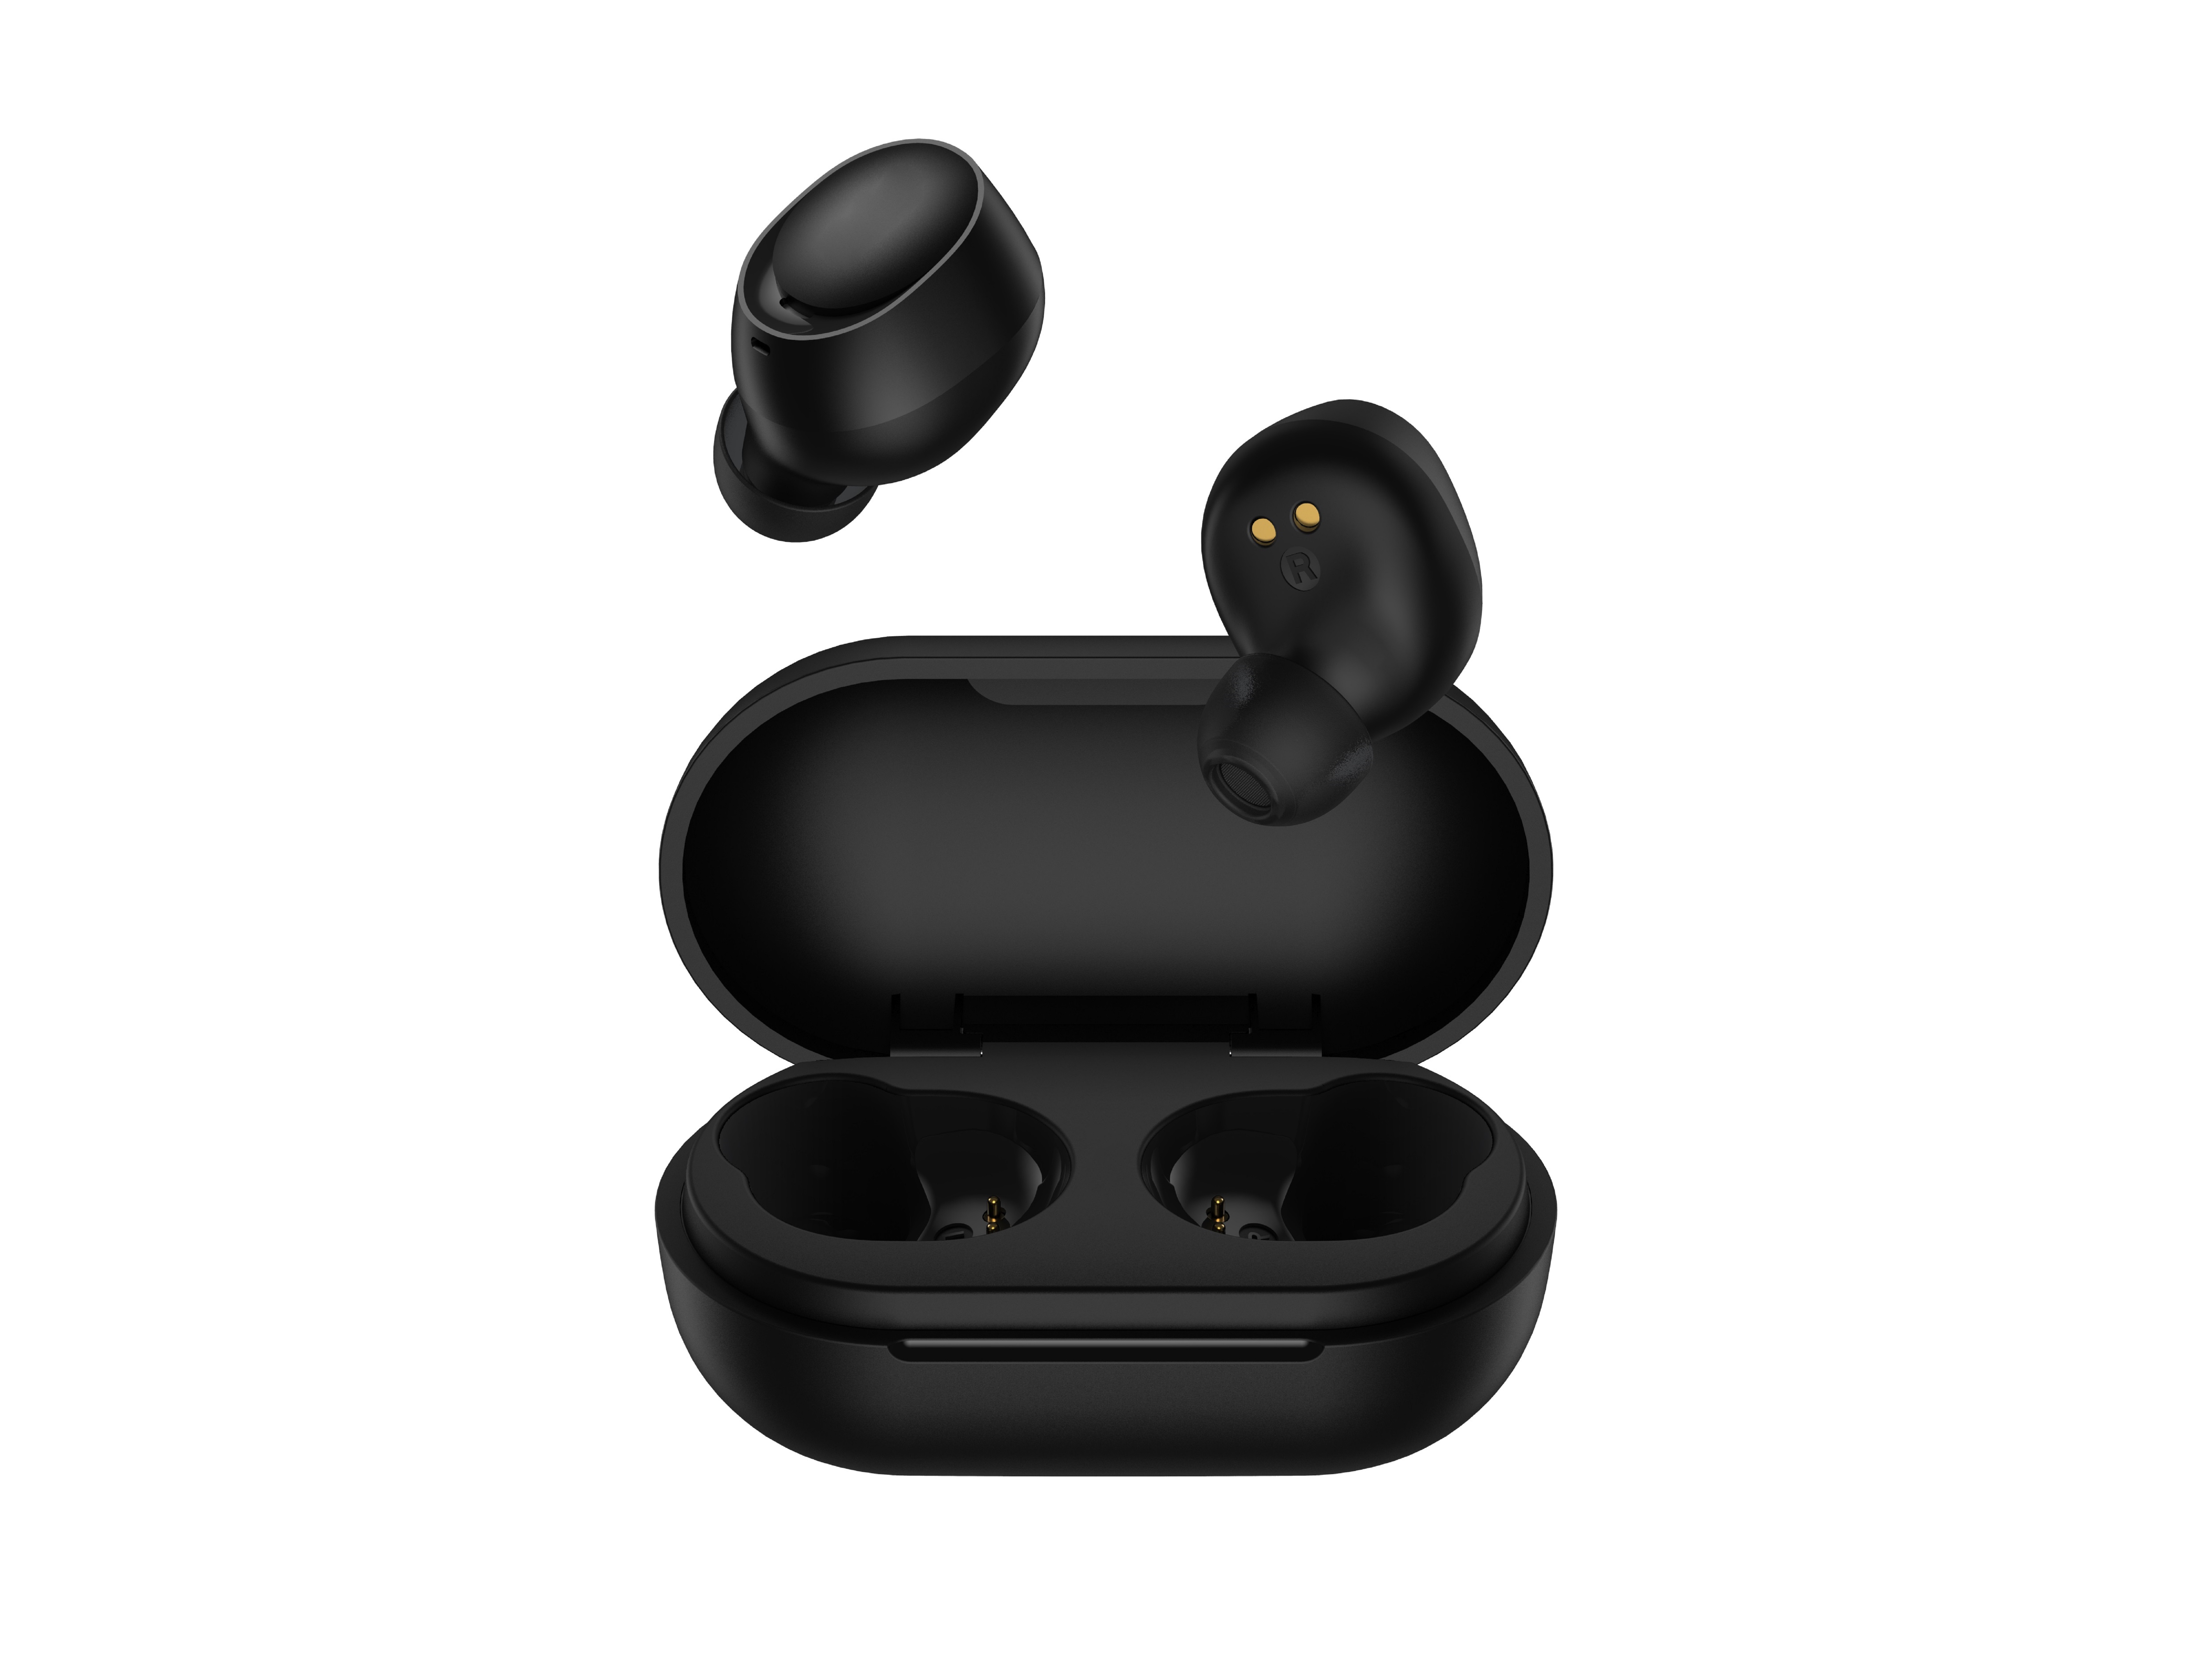 CrossBeats redefines comfort and convenience with the launch of its Ultra-Light true wireless earbud